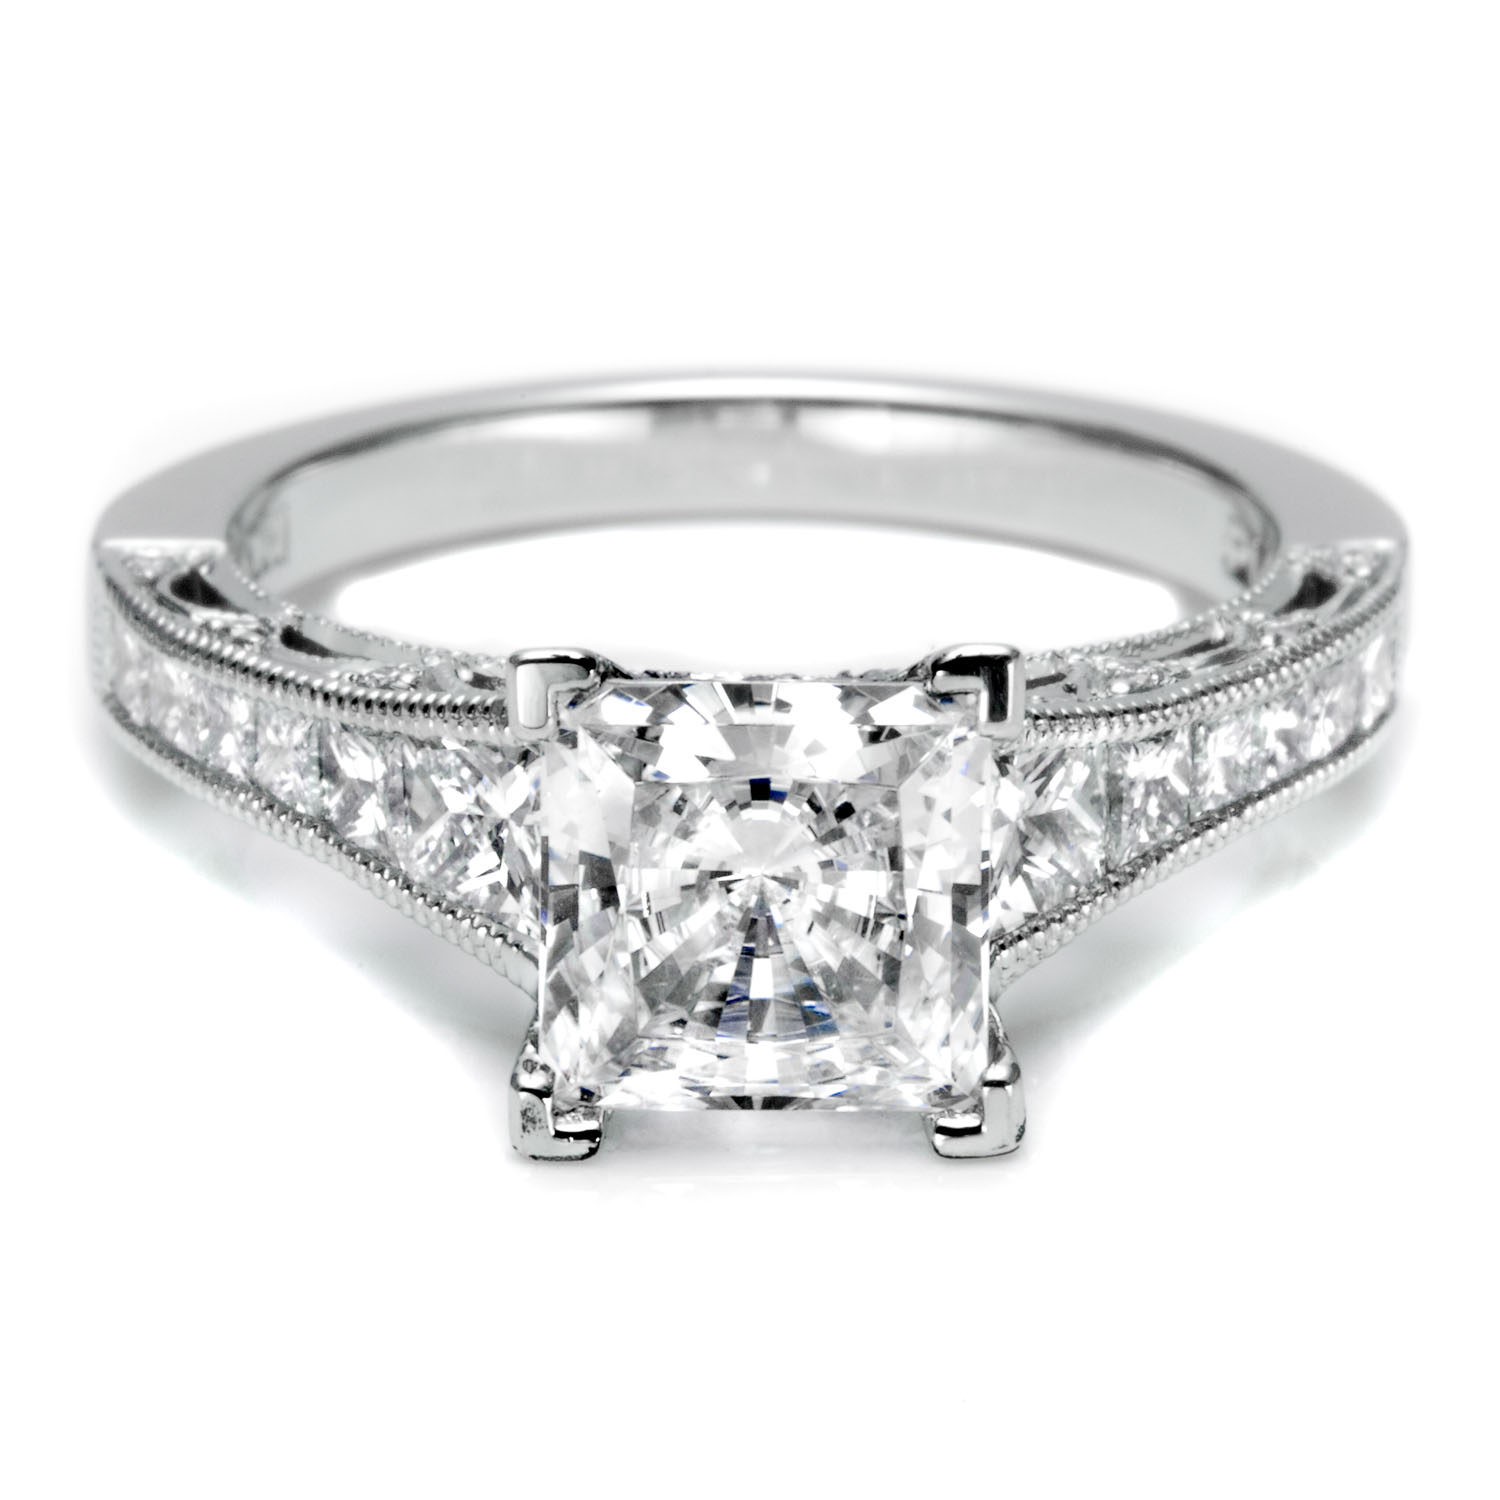 The Best Princess Cut Rings – Your Guide